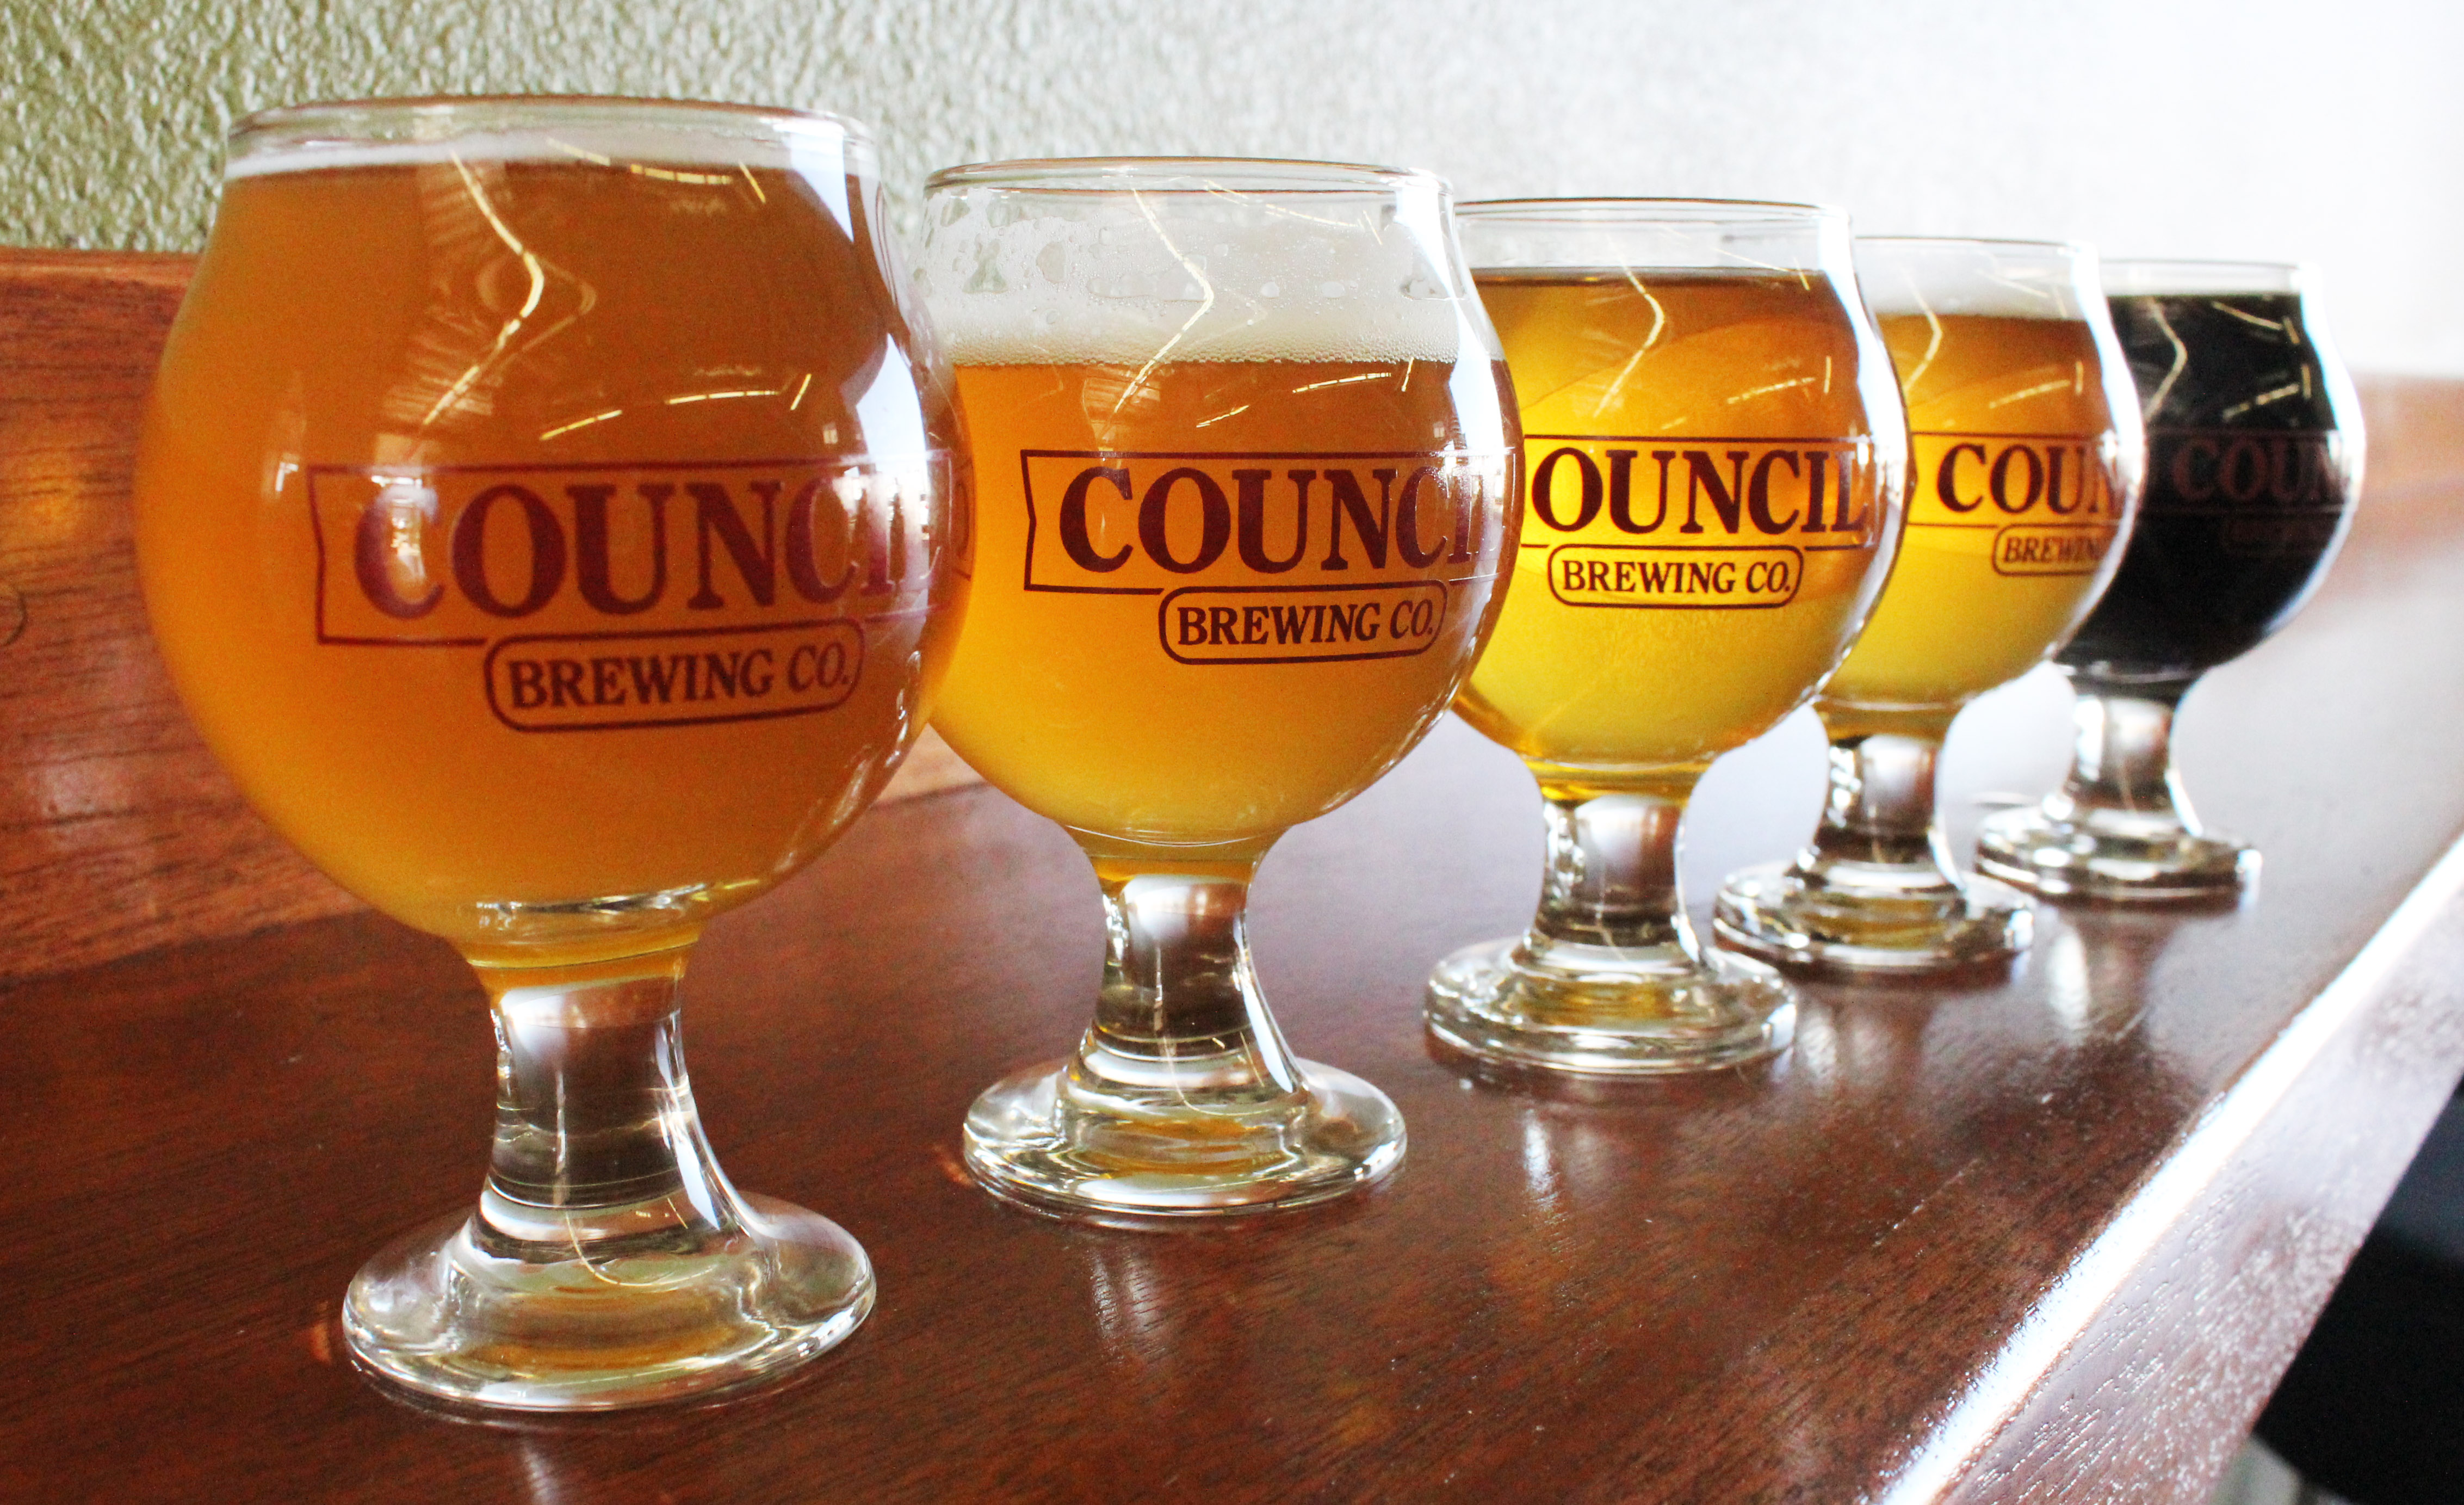 Beer Touring: Council Brewing Company.